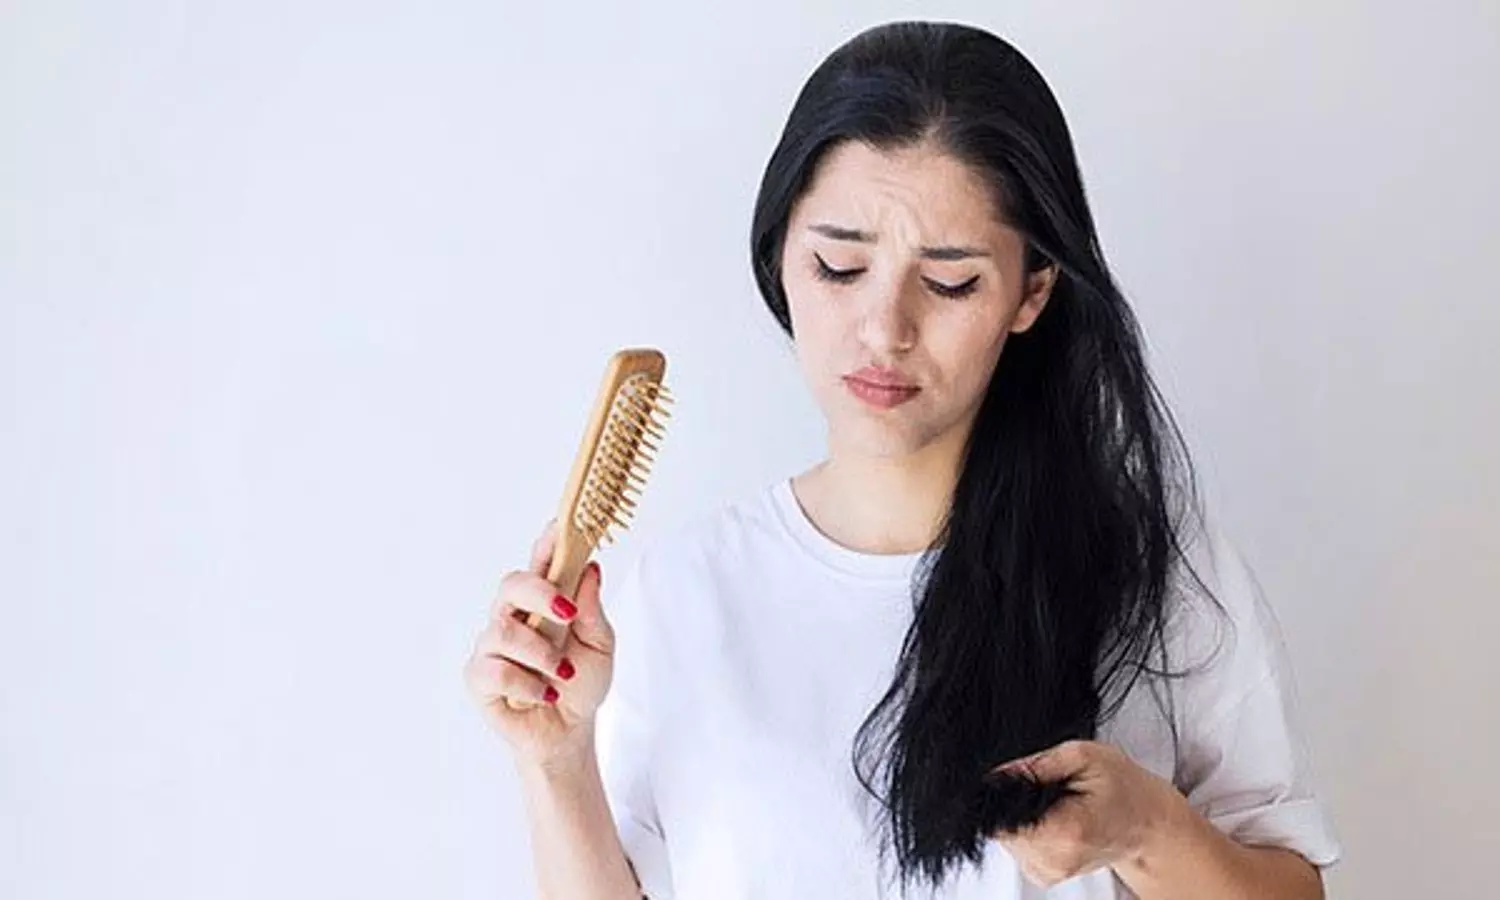 potential causes and illness of hair loss